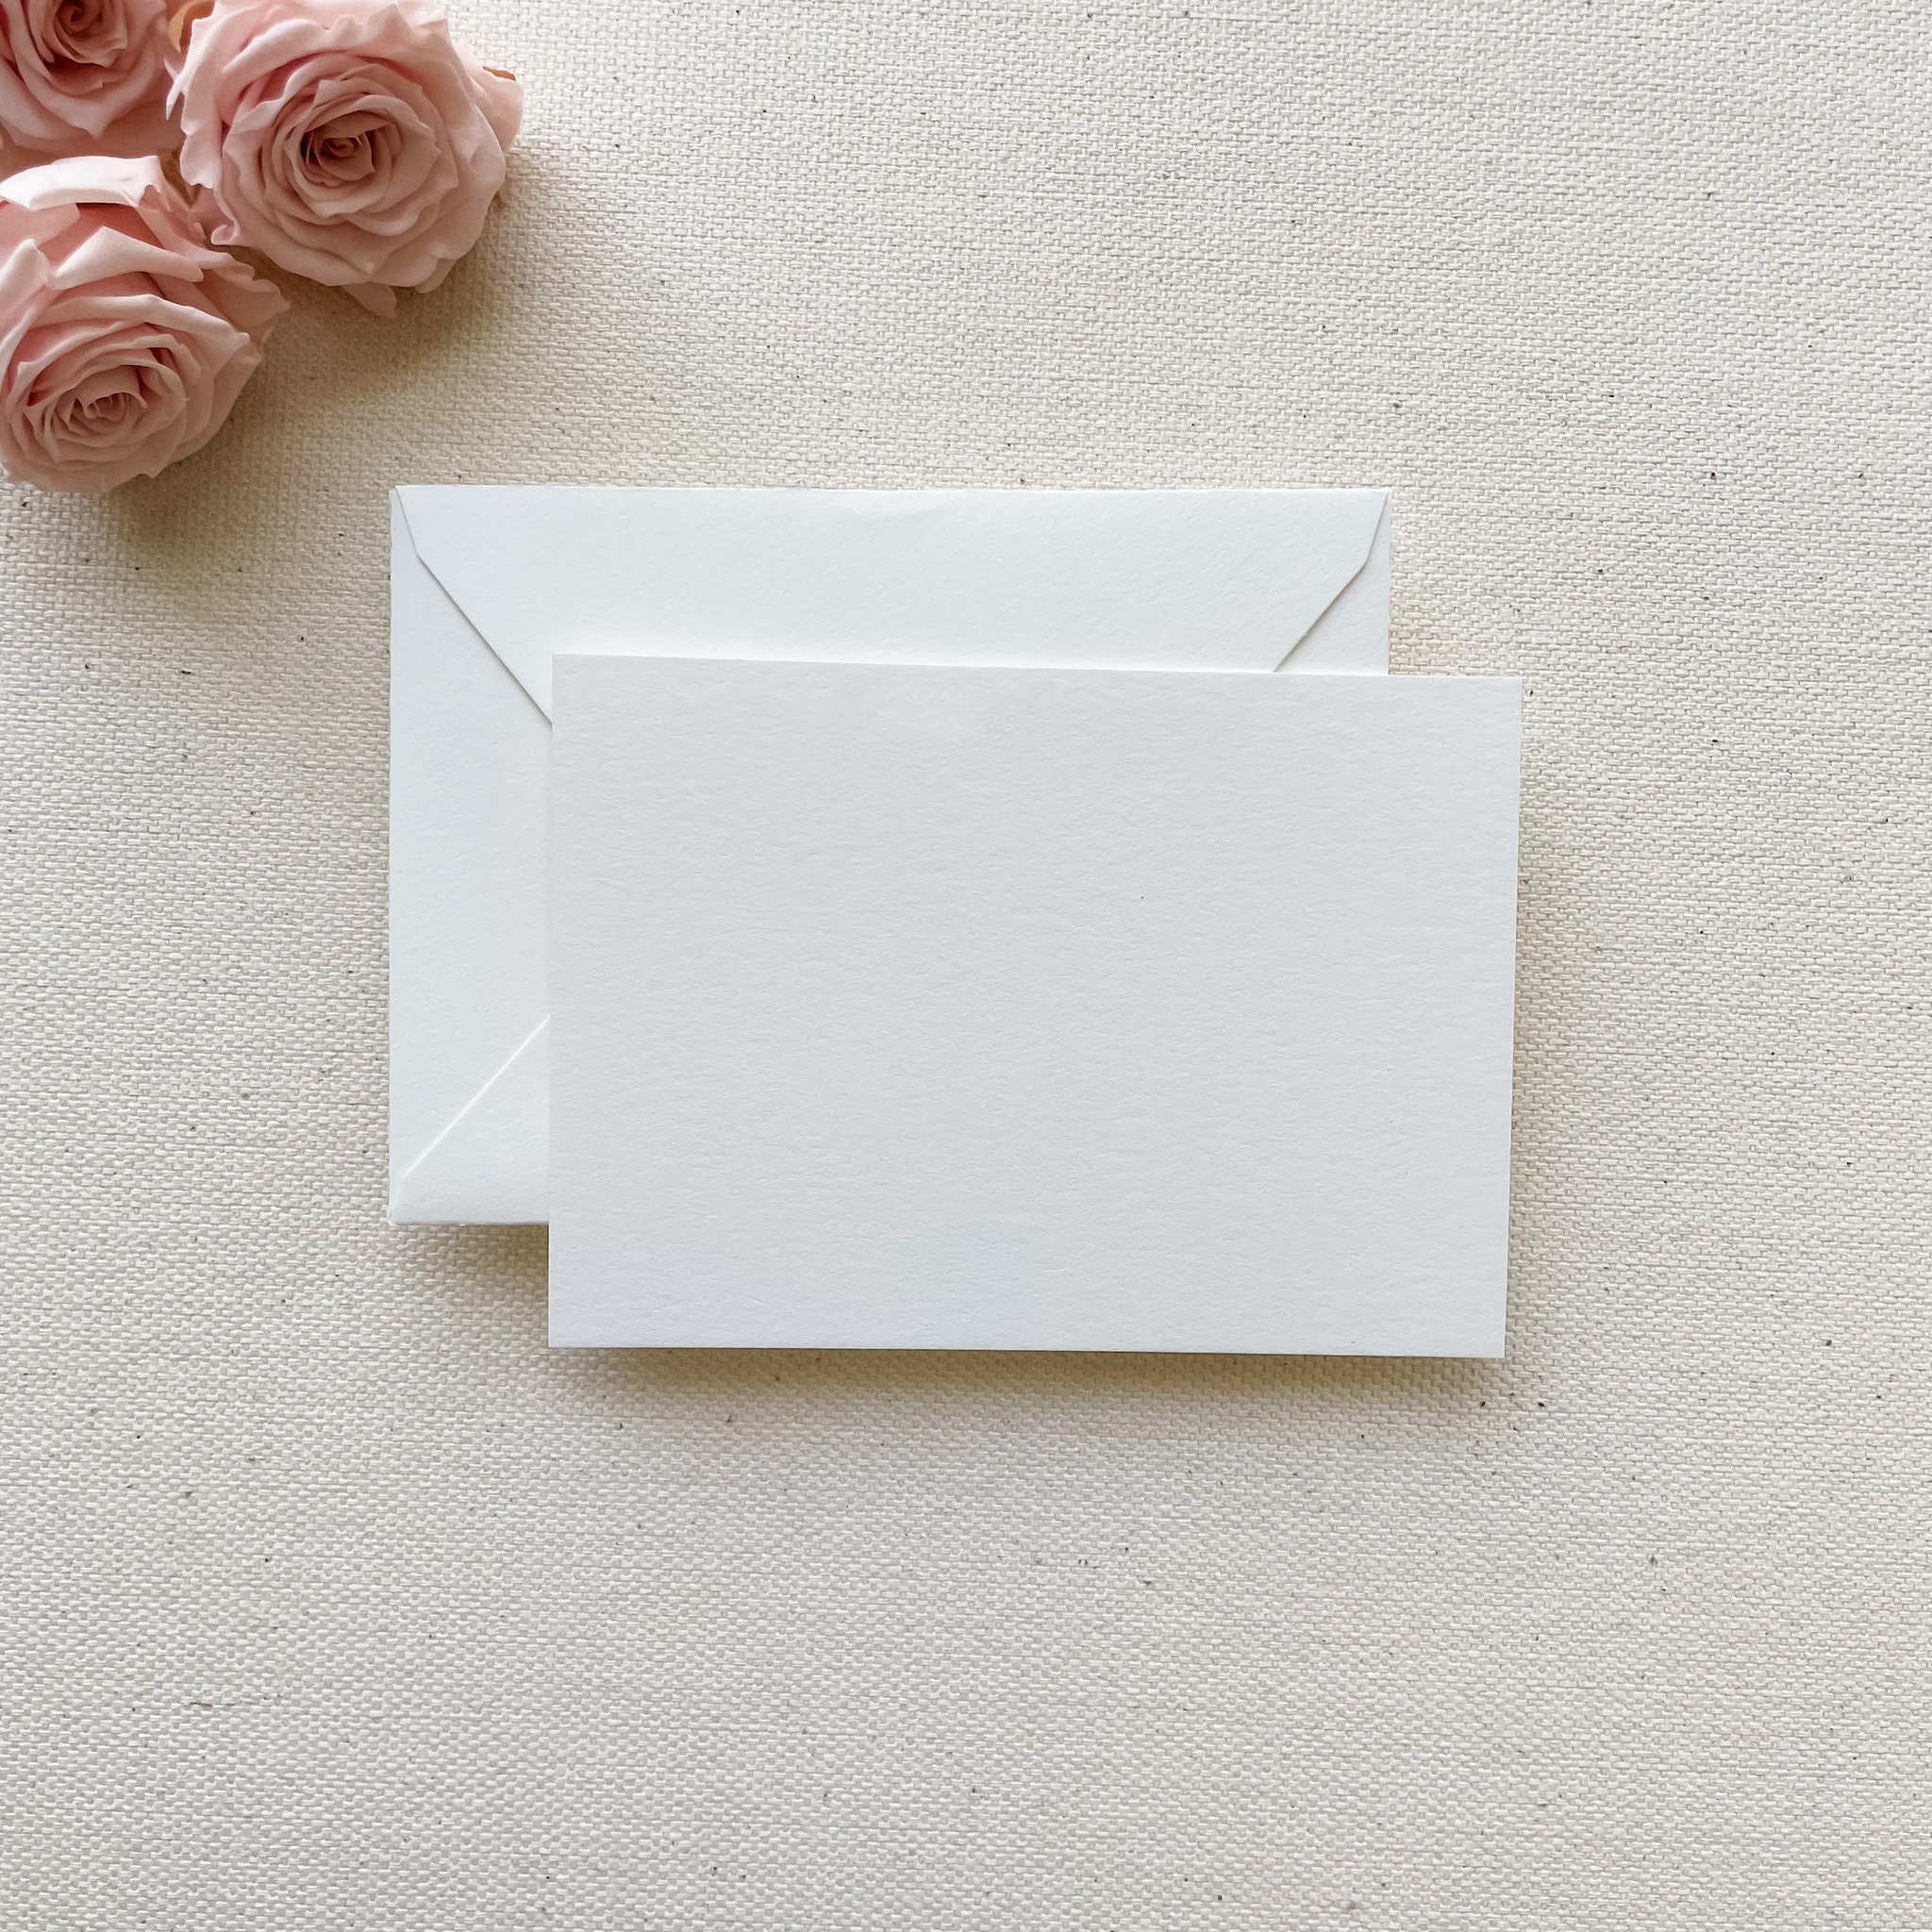 50 Mini Note Cards - 2x2 Blank Lunch Box Notes - Small Tiny Note Card Set